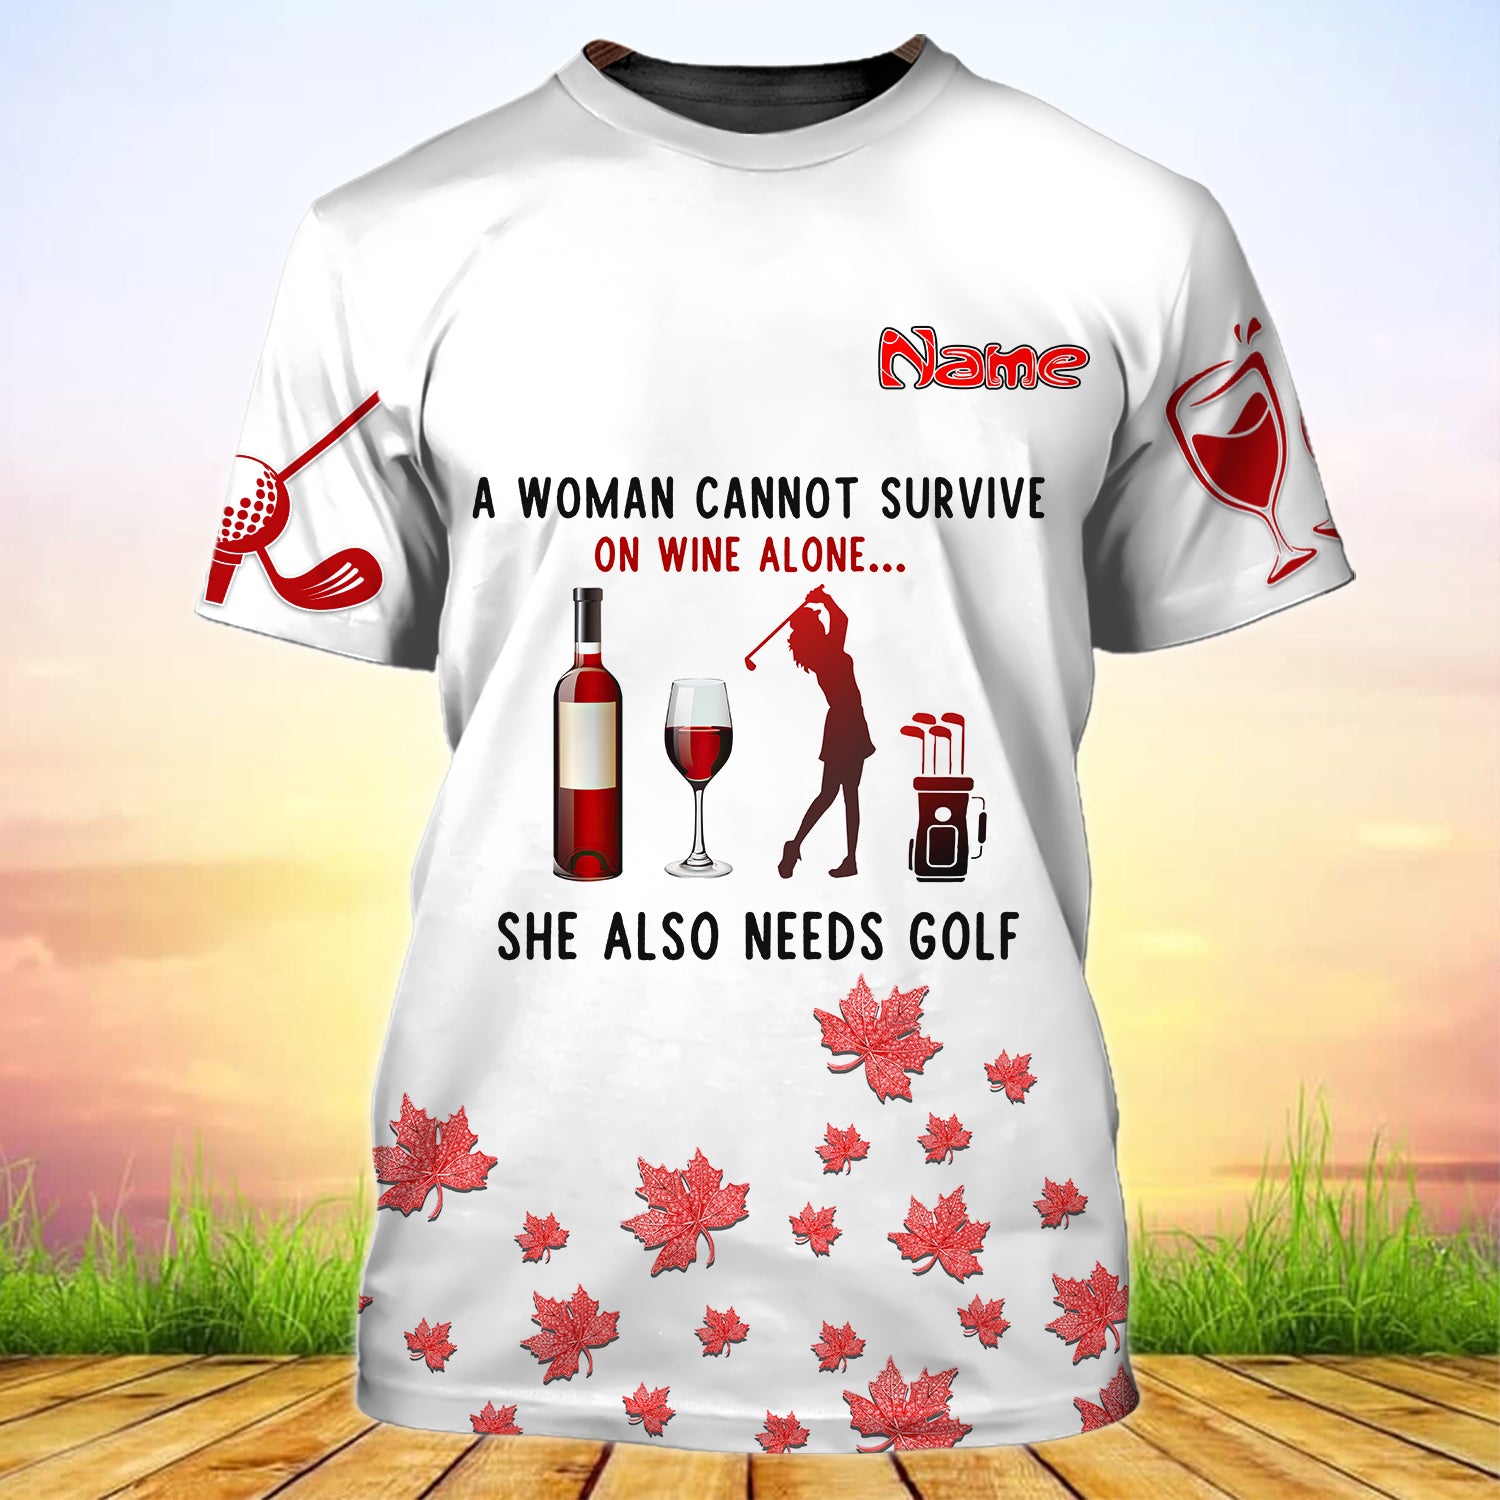 3D Golf and Wine - Personalized Name 3D T Shirt - Vhv-tshirt-001